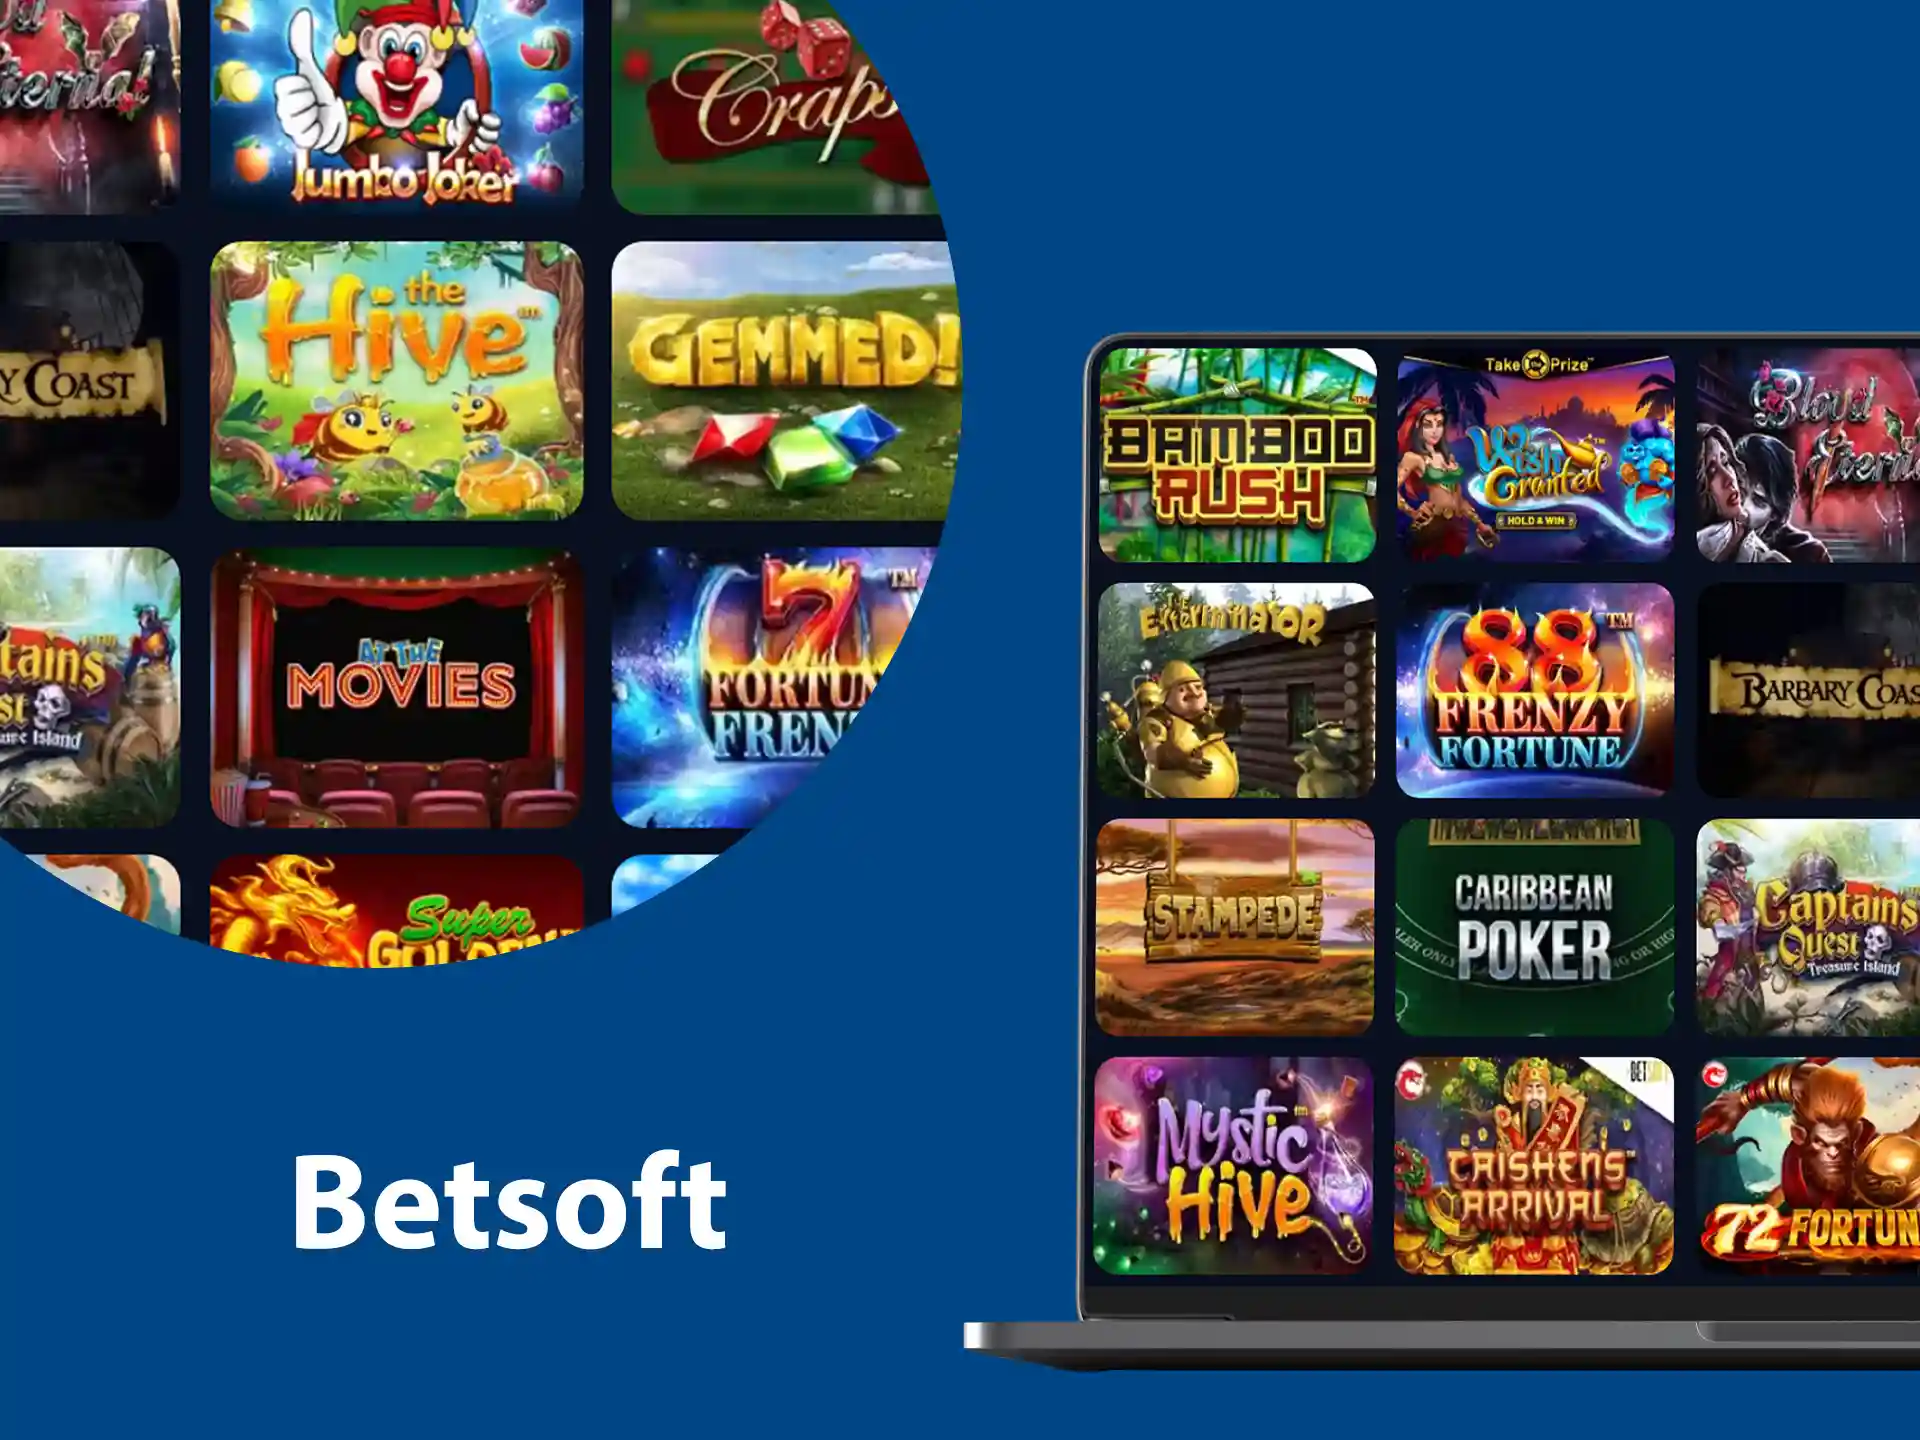 Betsoft has created over 200 innovative games and is a leader in creating exciting slot machines.